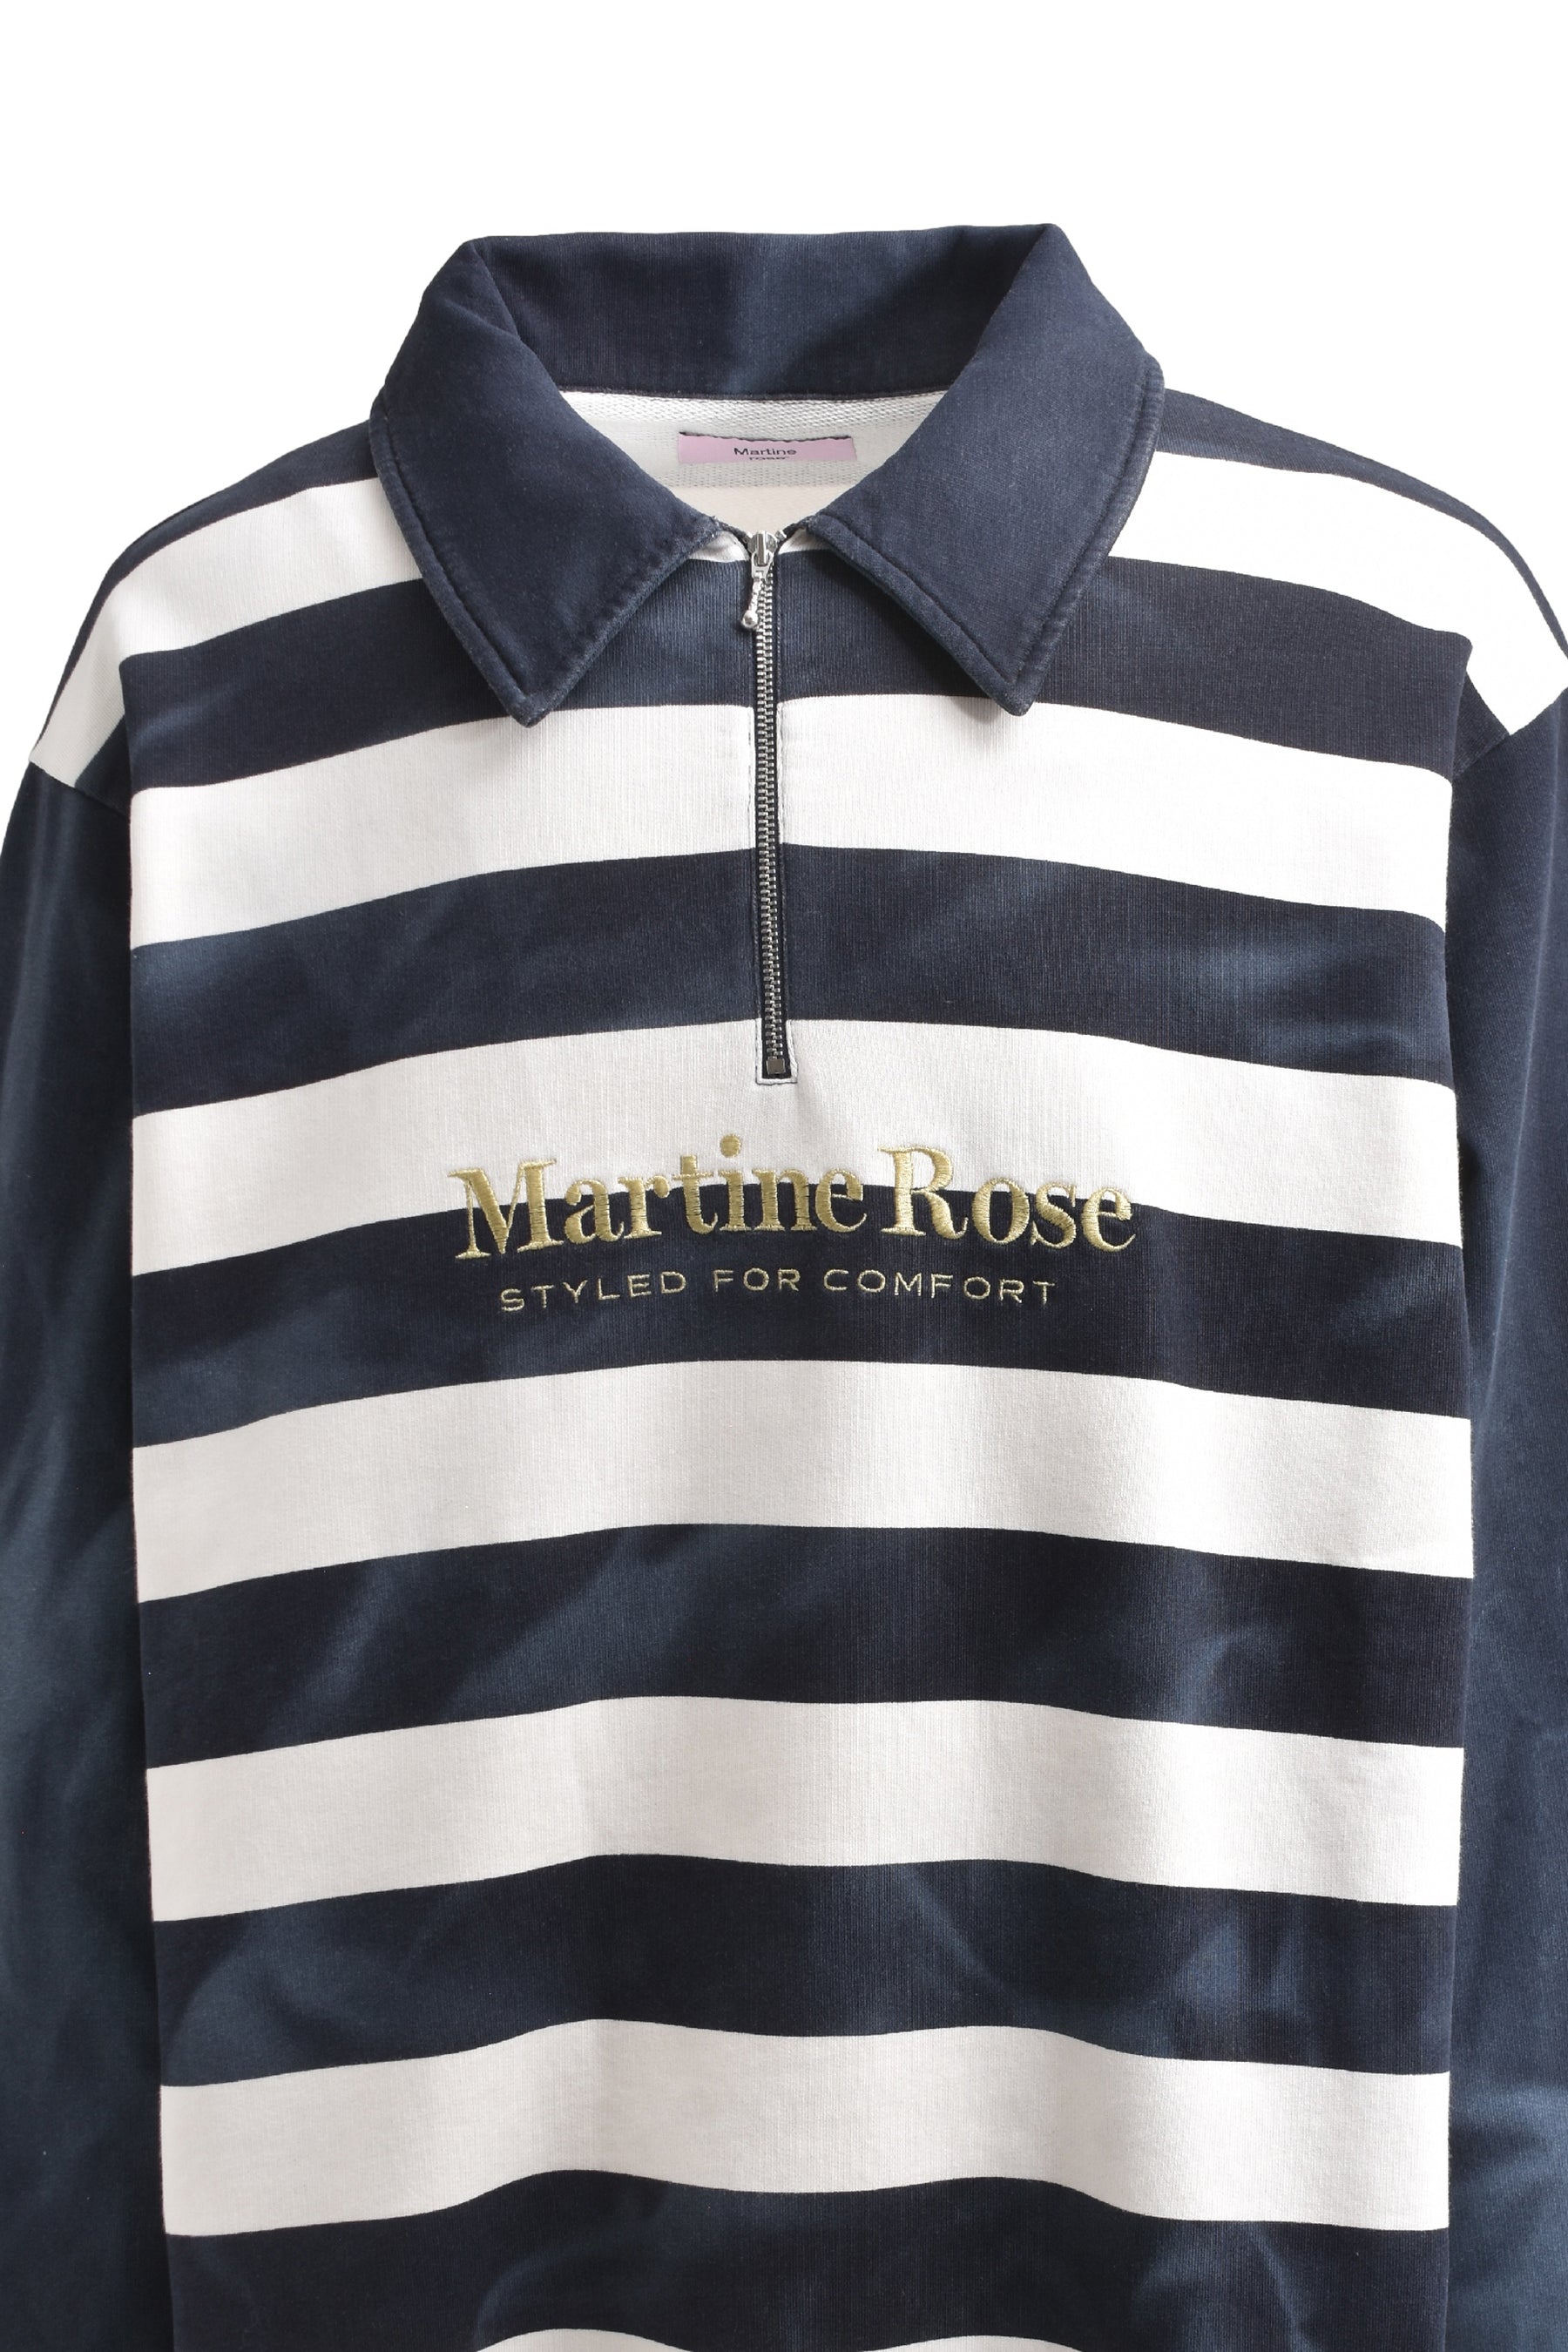 ZIP UP POLO / NVY WHT STRIPES